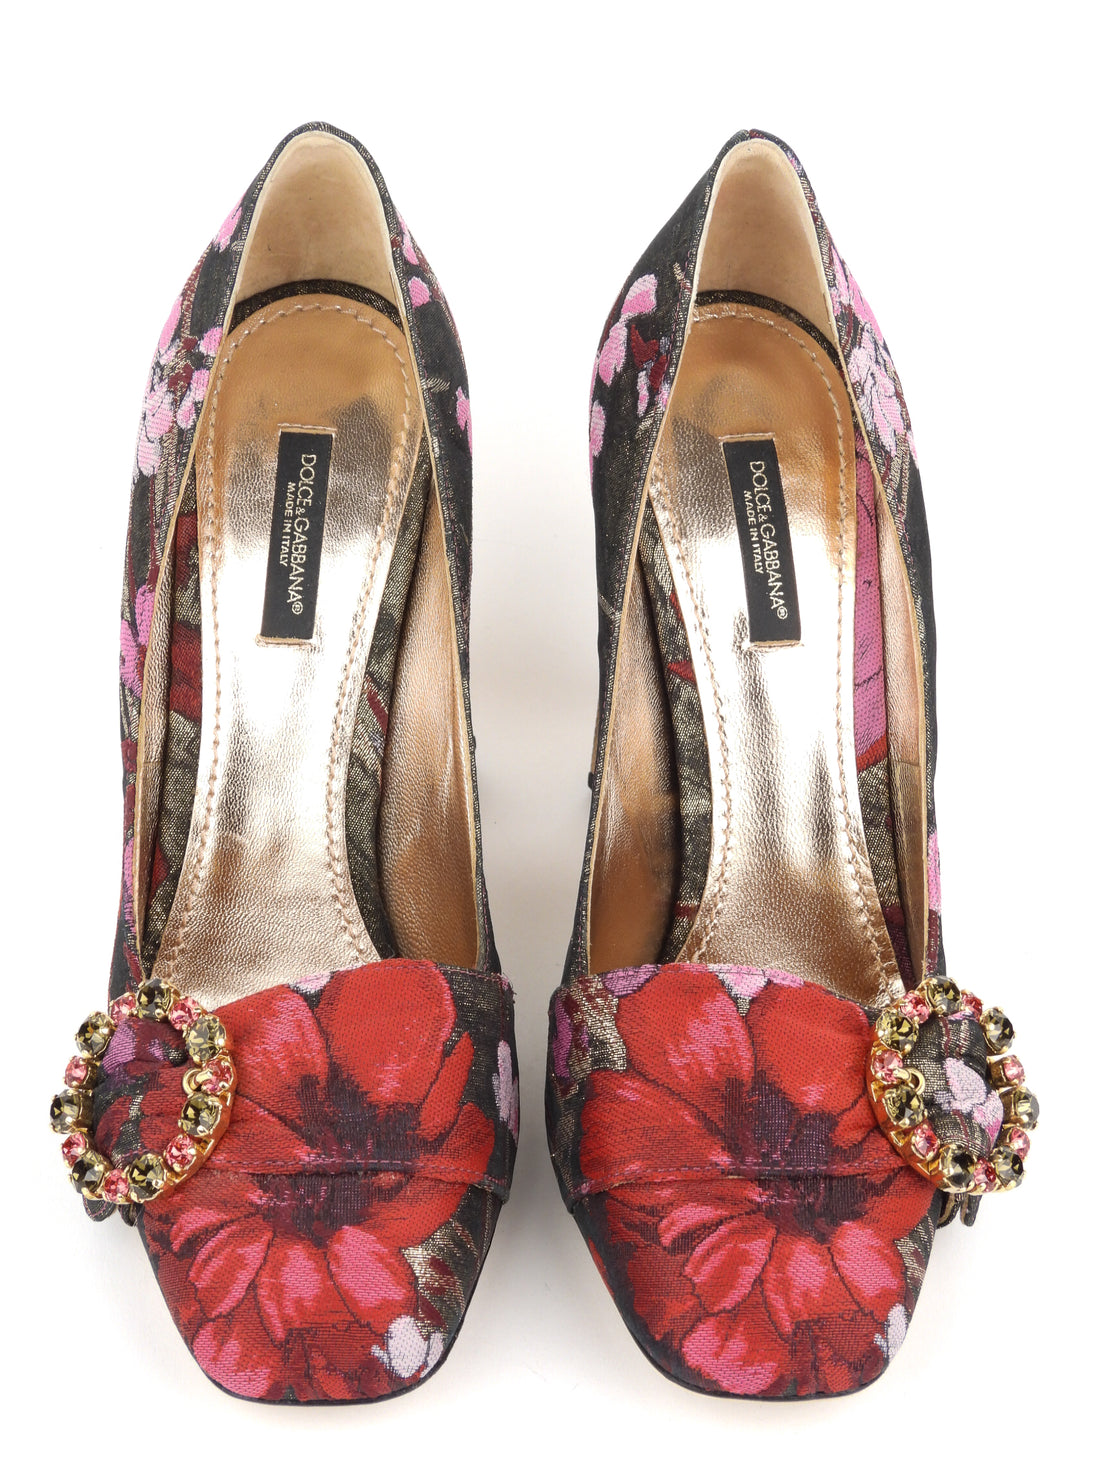 Dolce and Gabbana Red and Pink Floral Canvas Block Heel Jackie Pumps - 39.5